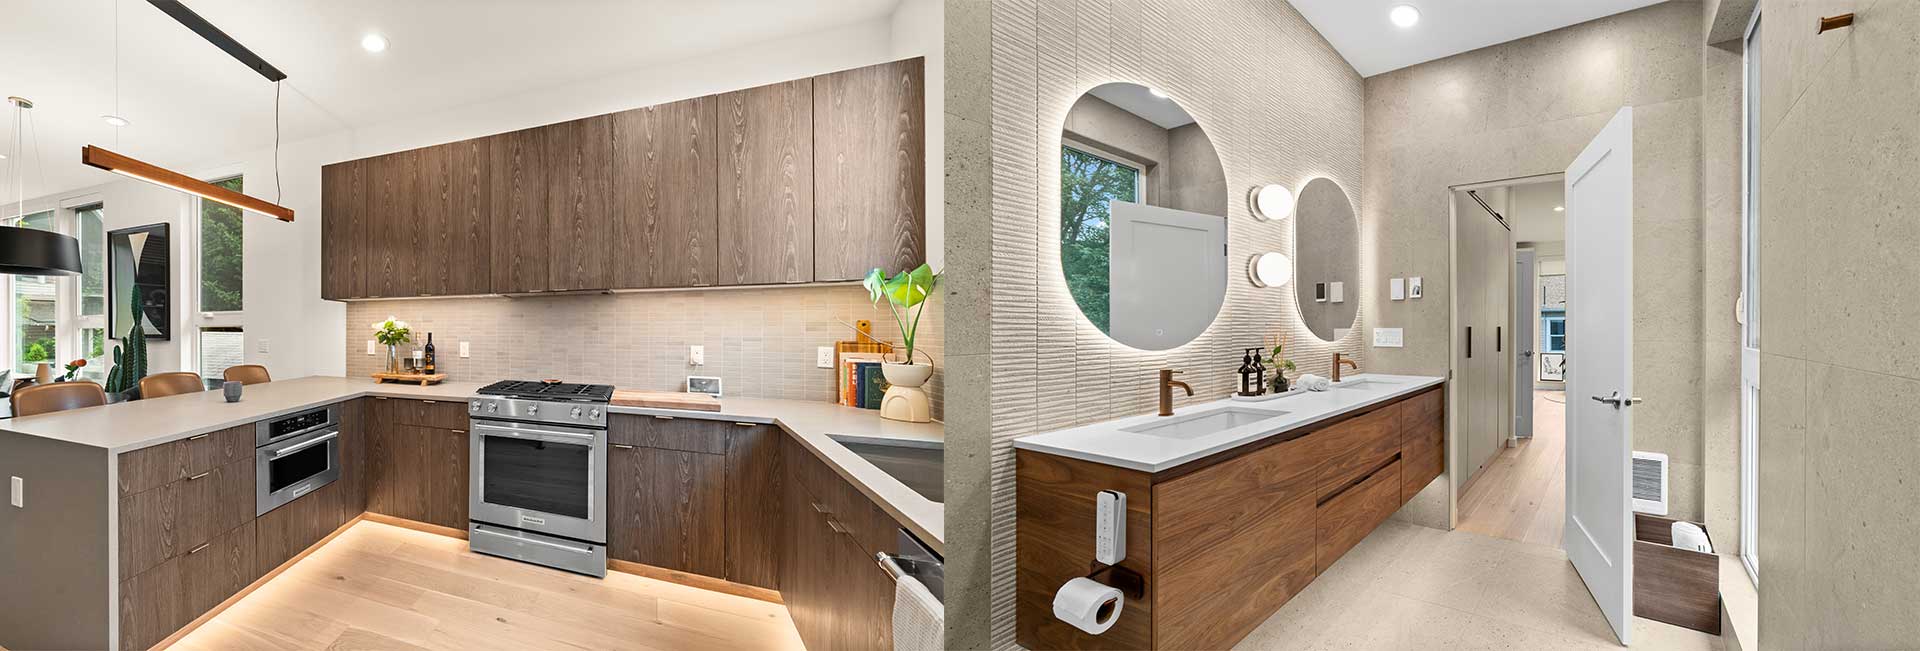 Kitchen and Bathroom Remodeling in Capitol Hills, Seattle